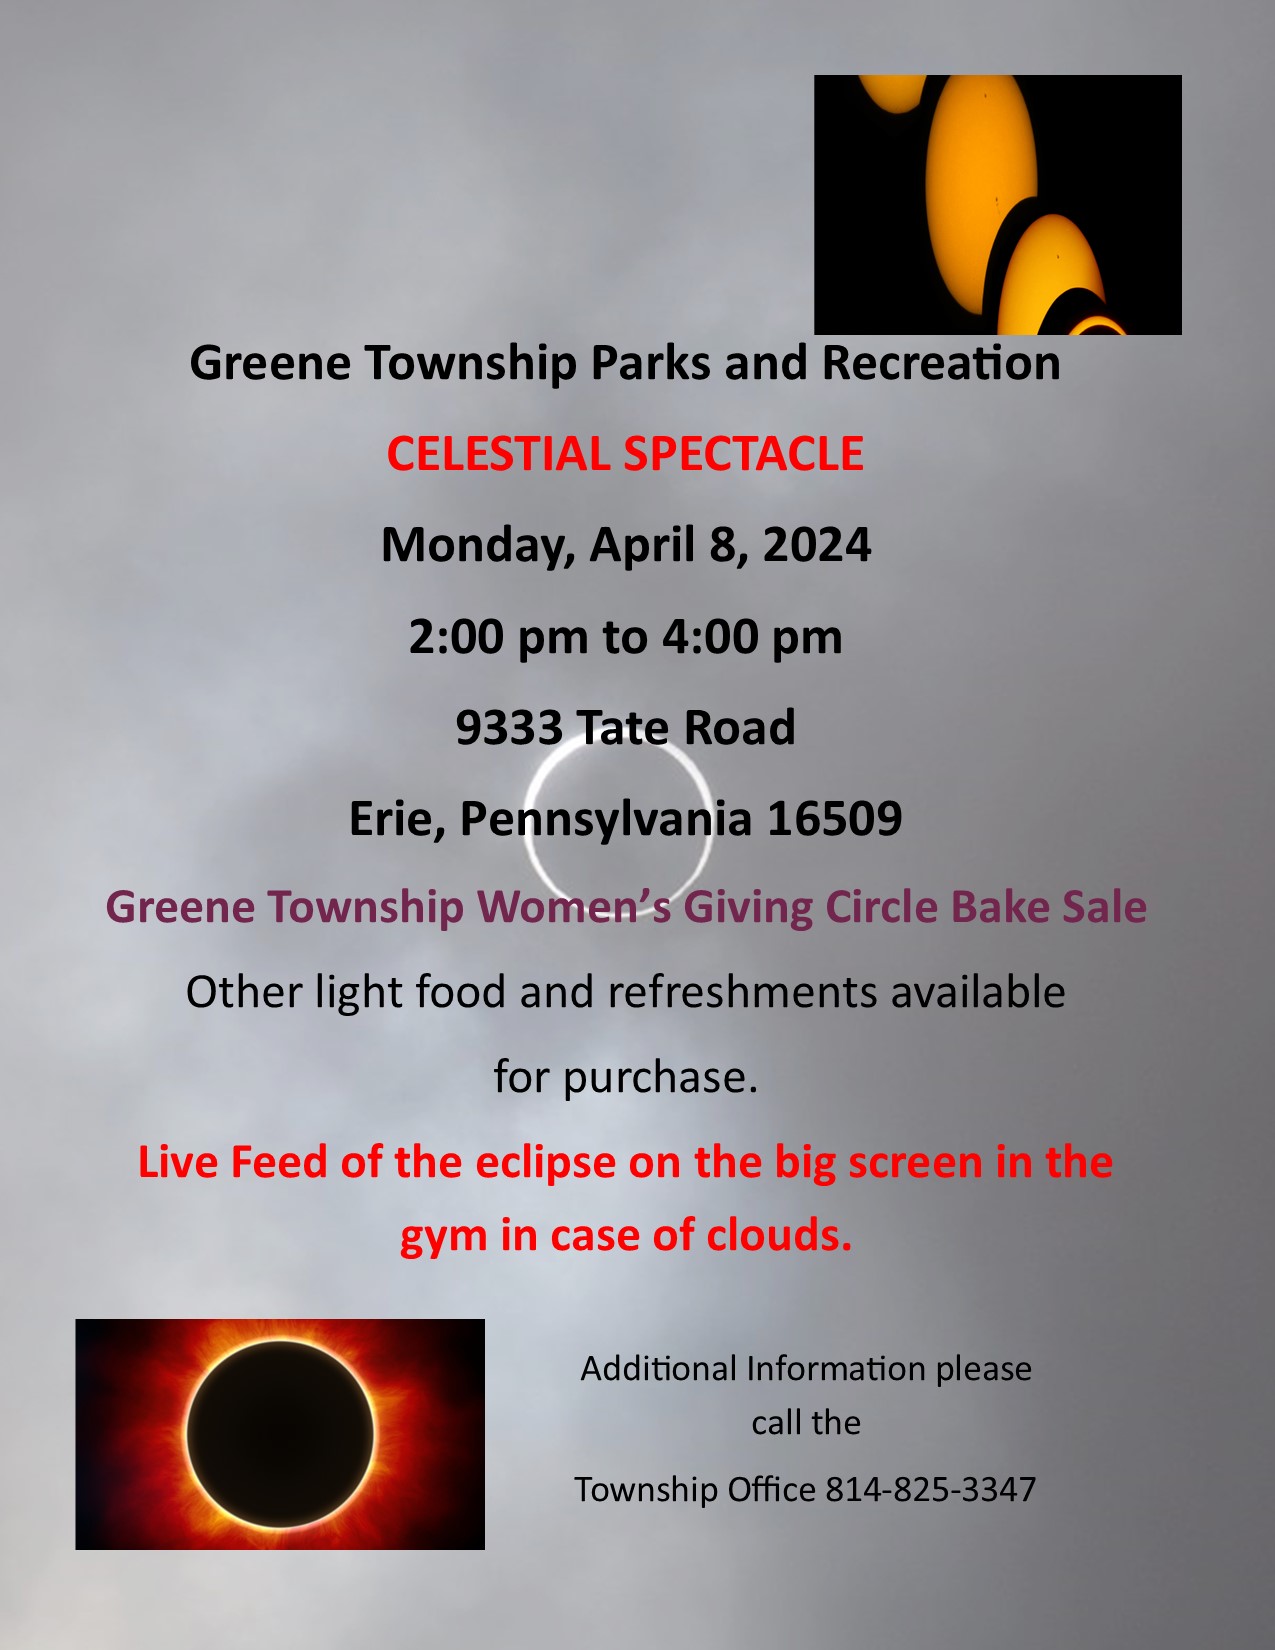 Celestial Spectacle in Greene Township